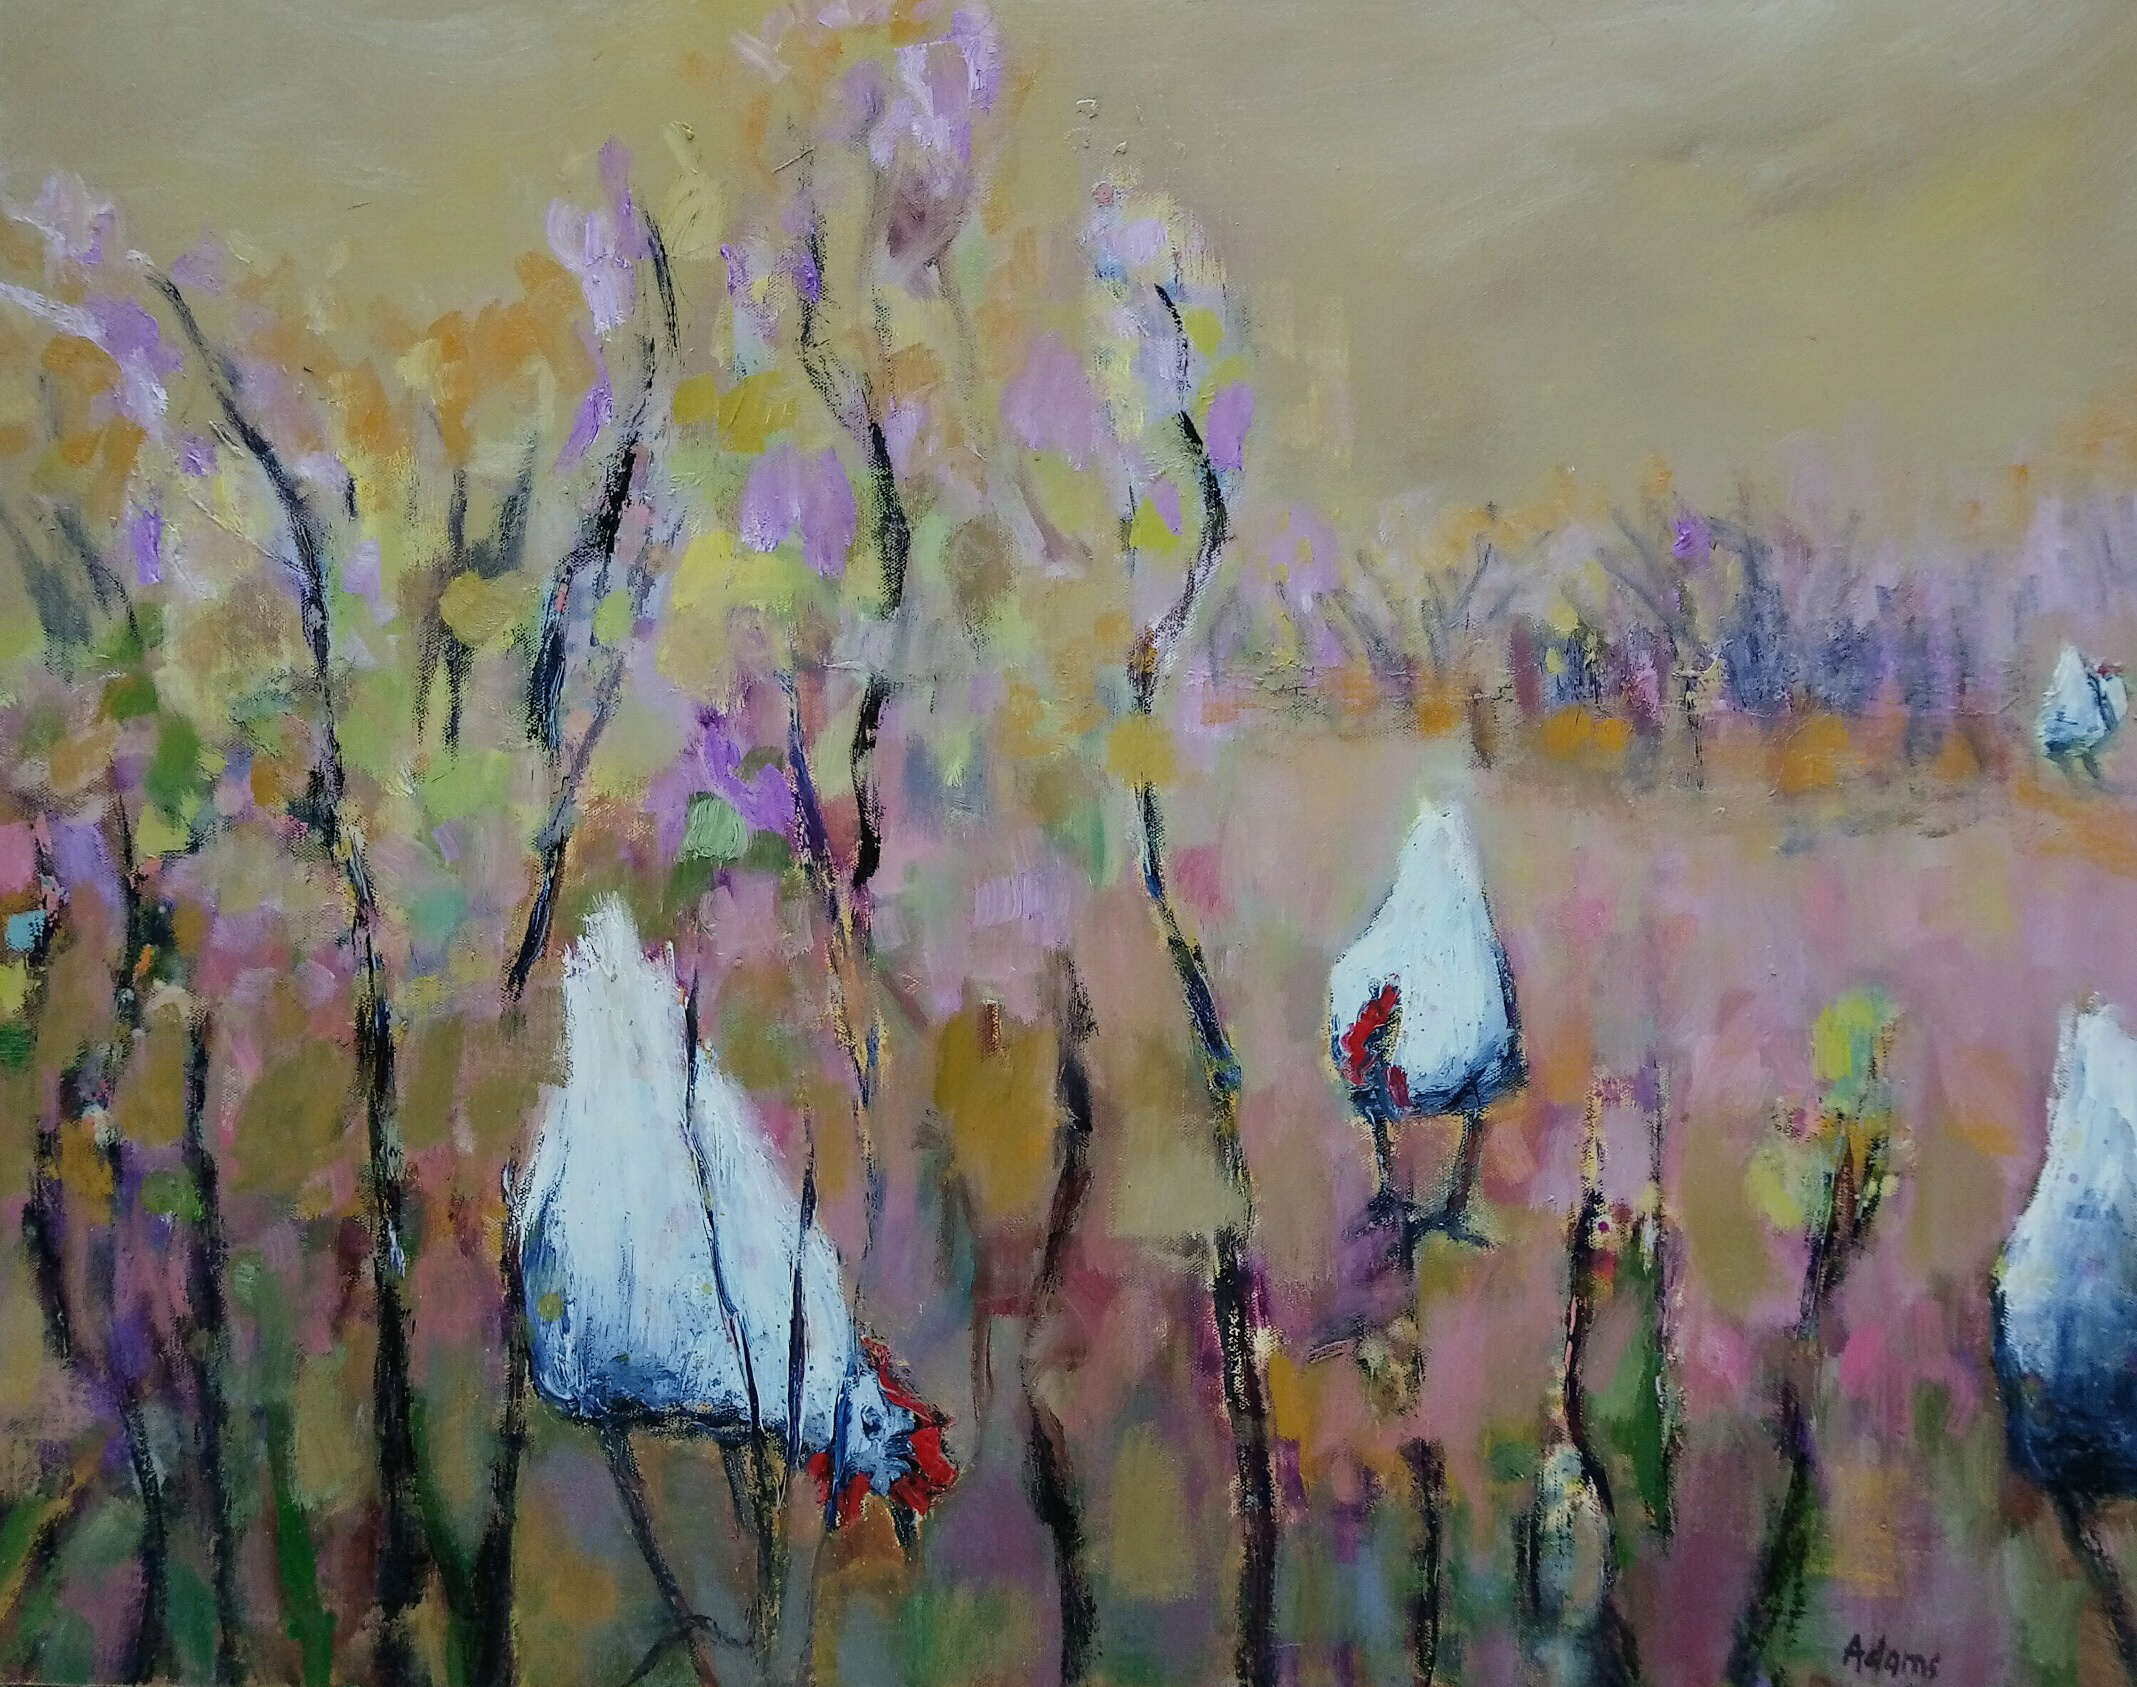 painting of chooks in a field.